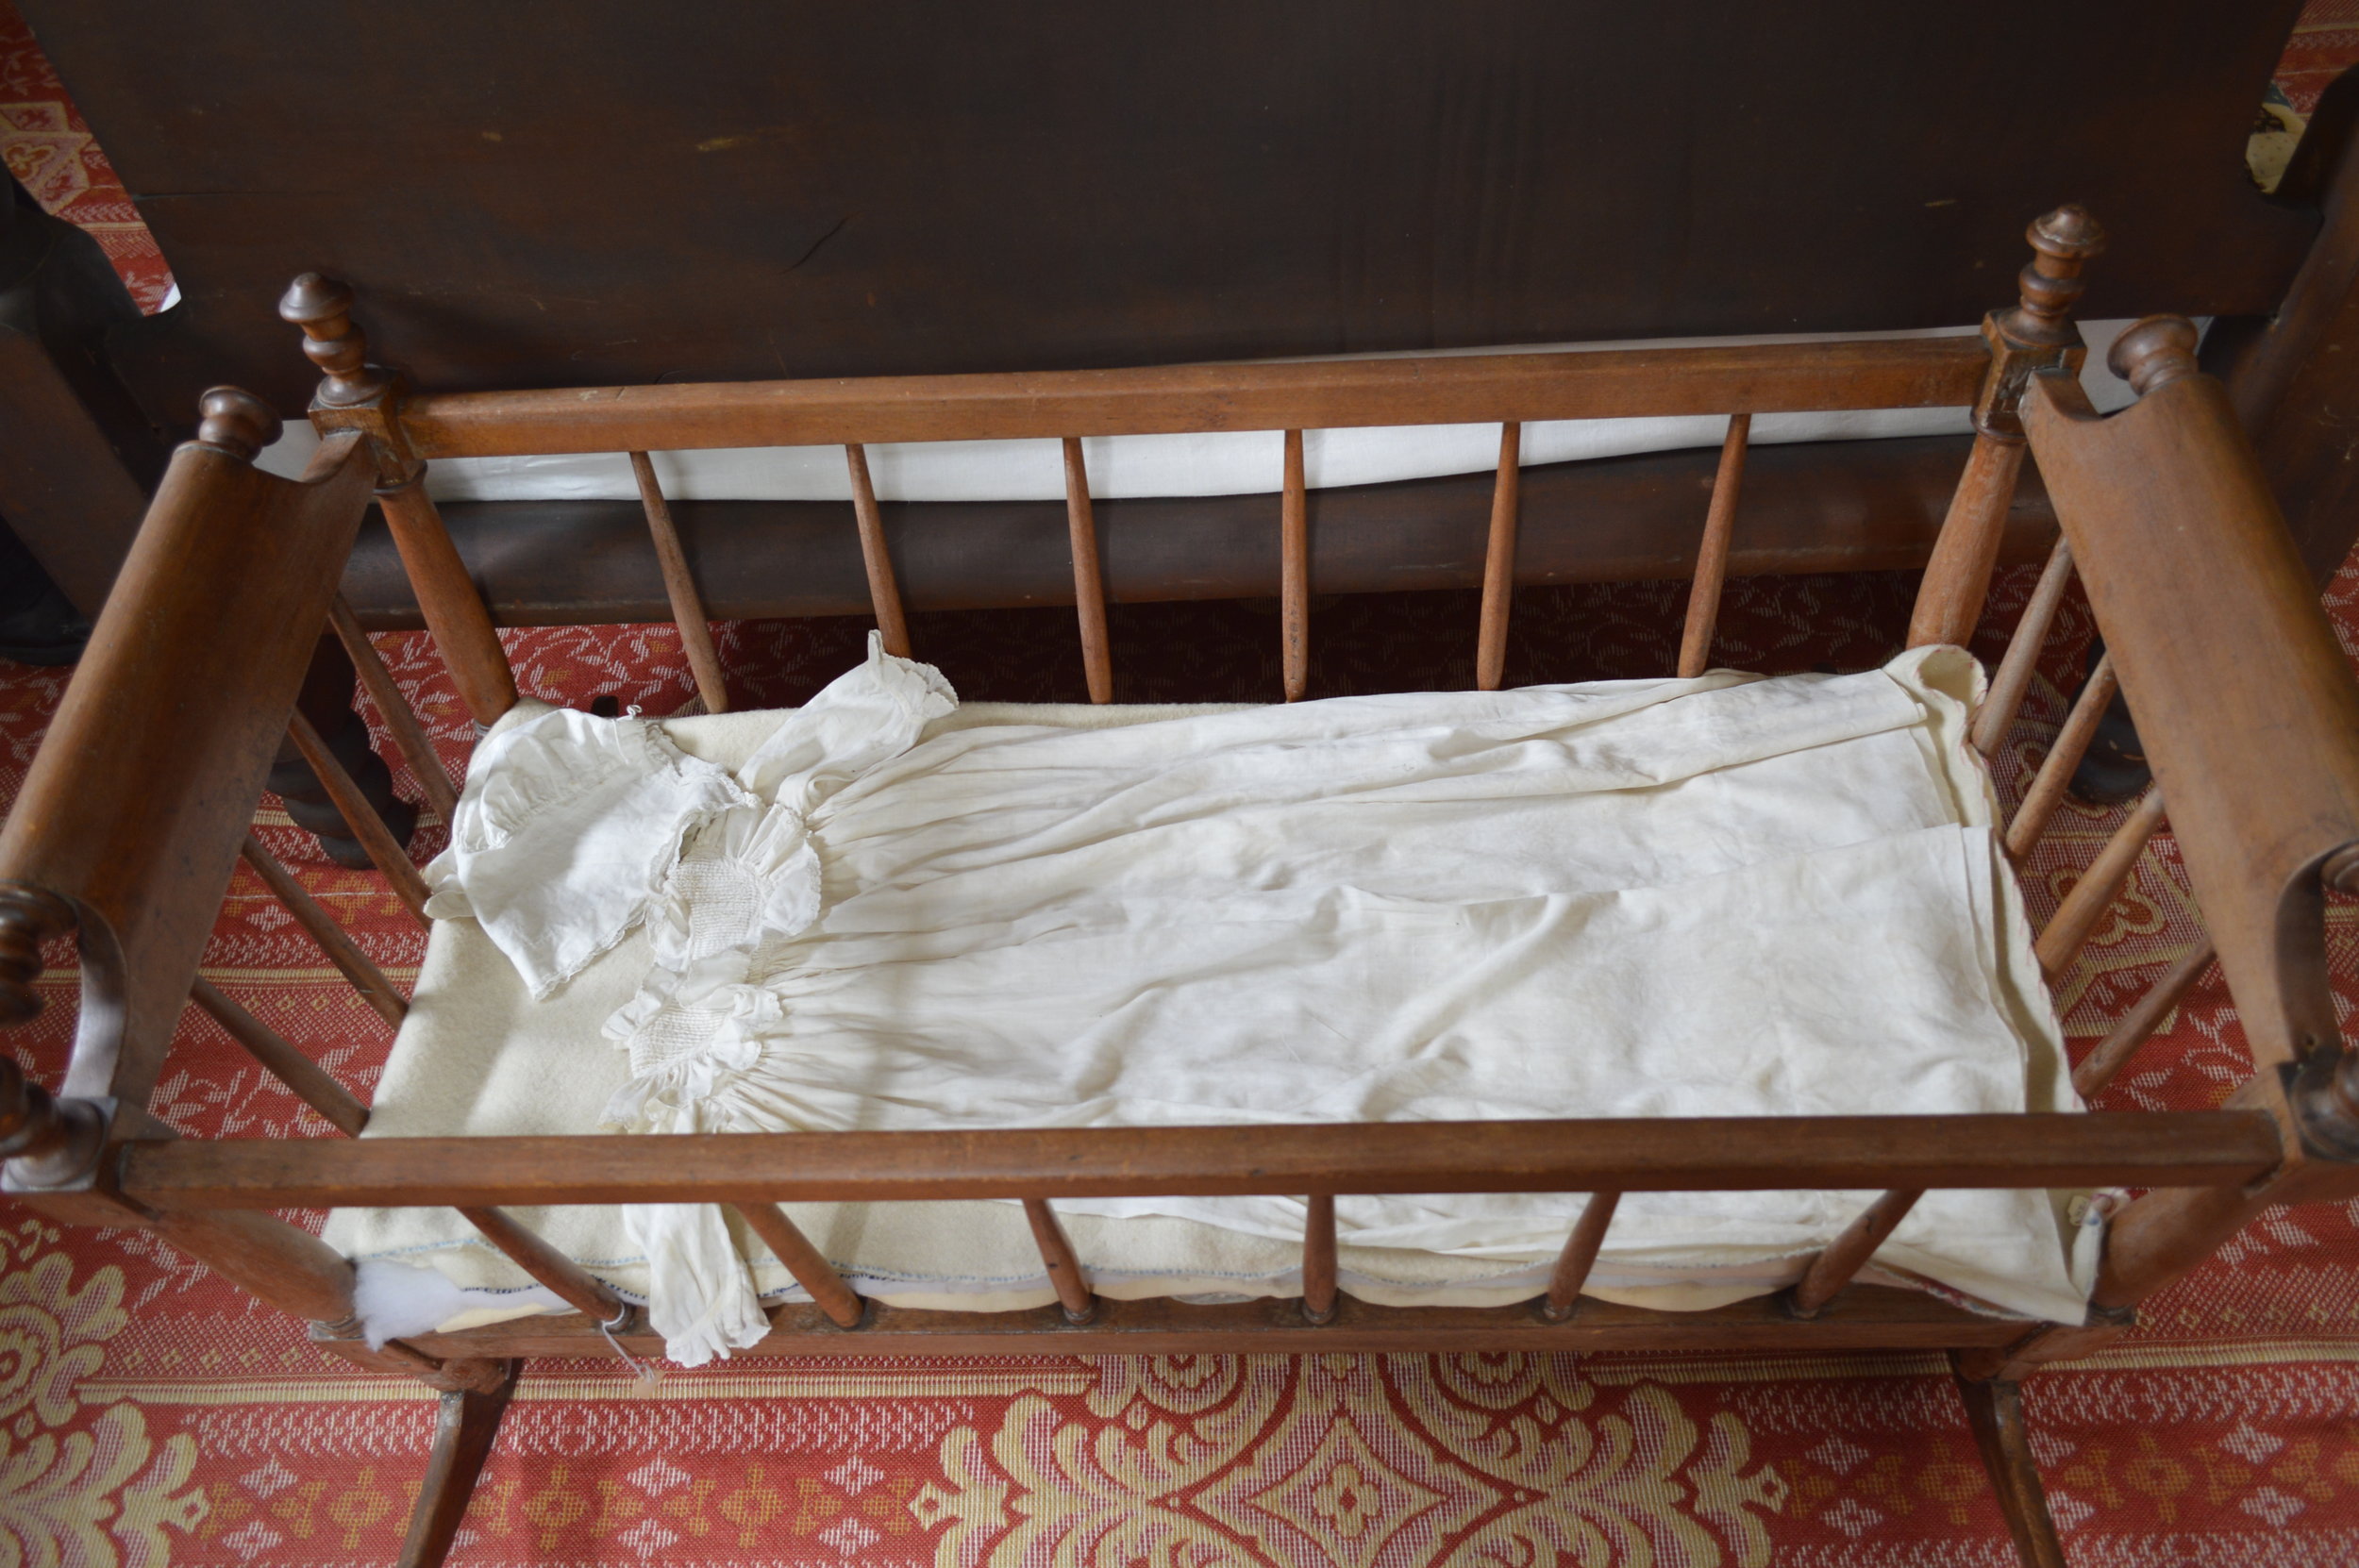 Next to the parents’ bed was a rocking cradle with a lace embroidered cap and gown for the baby. (Copy)